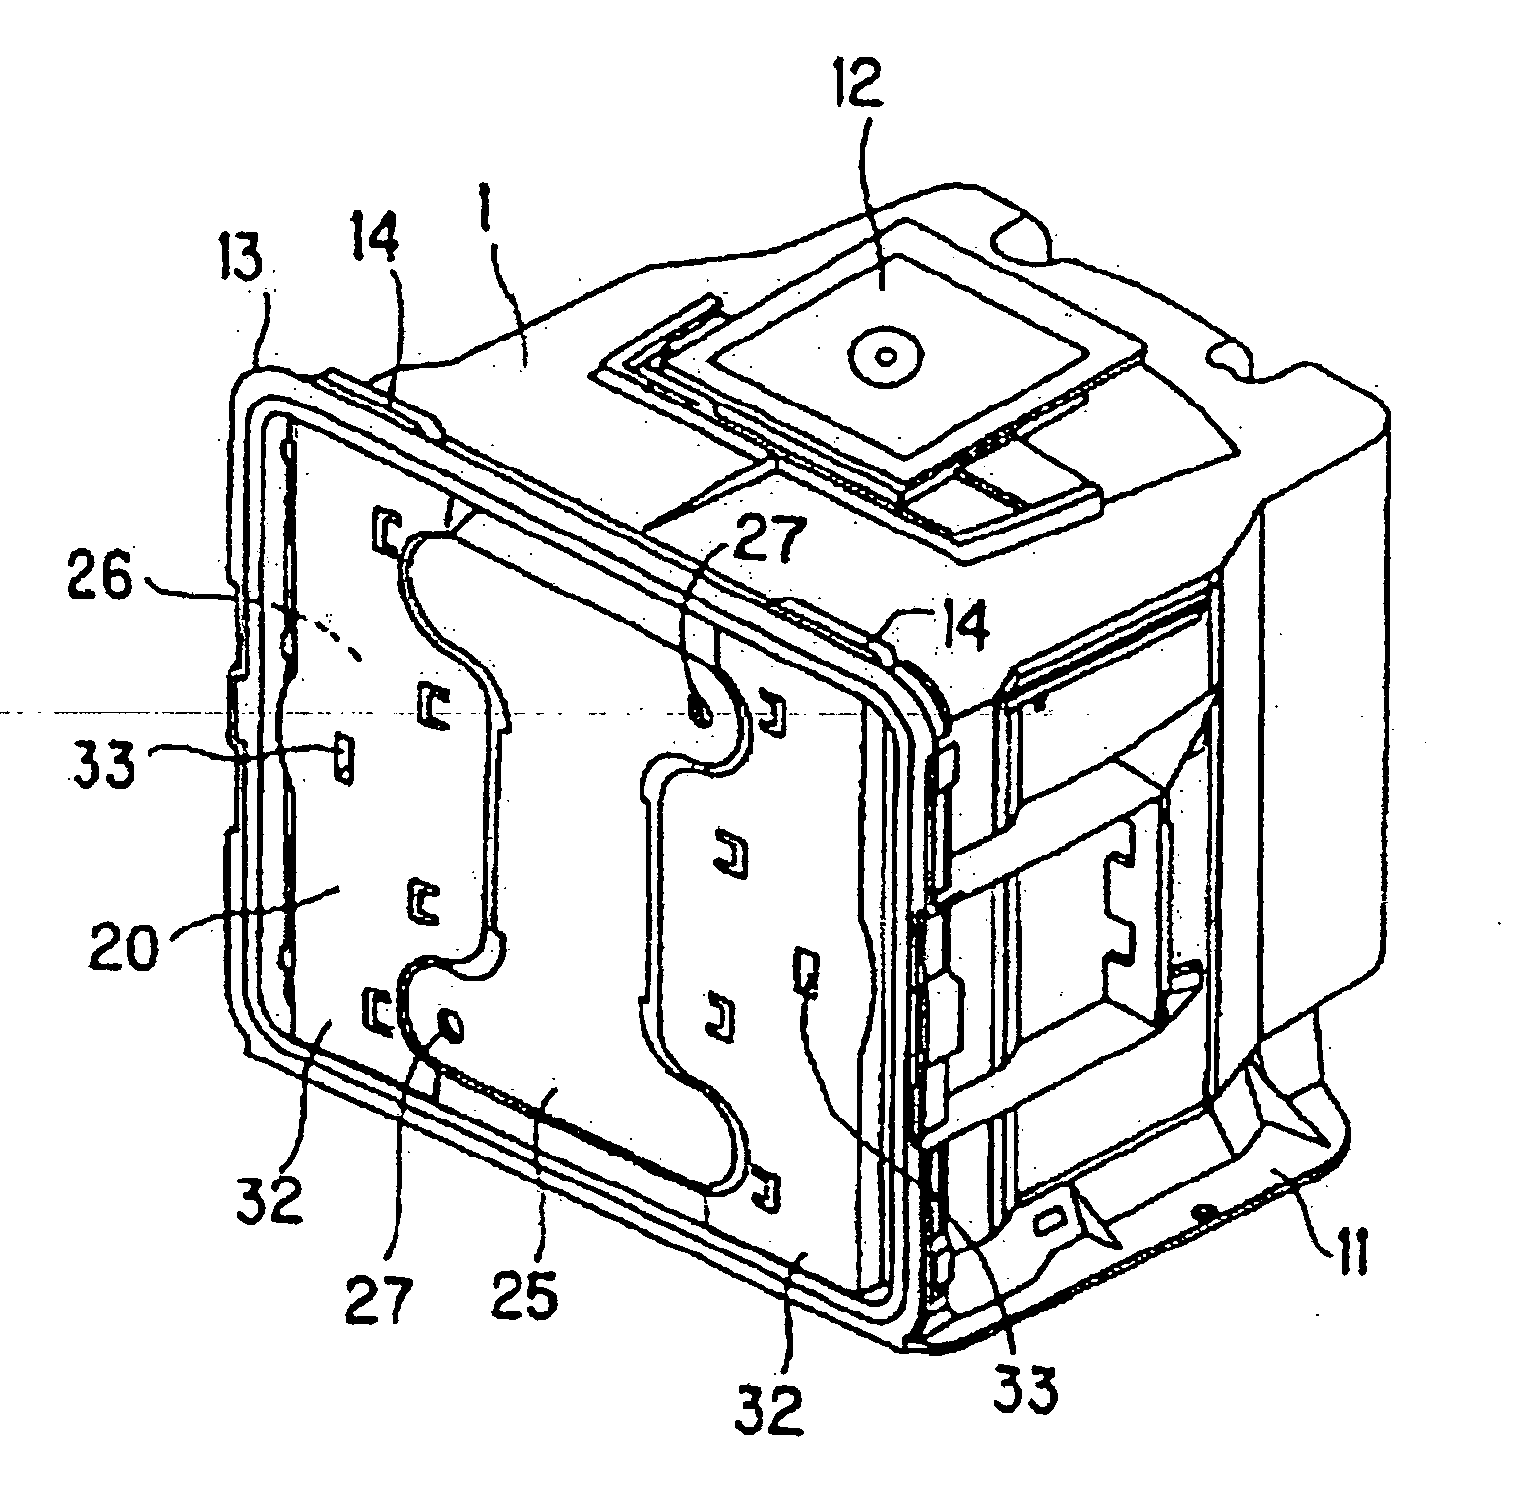 Substrate storage container